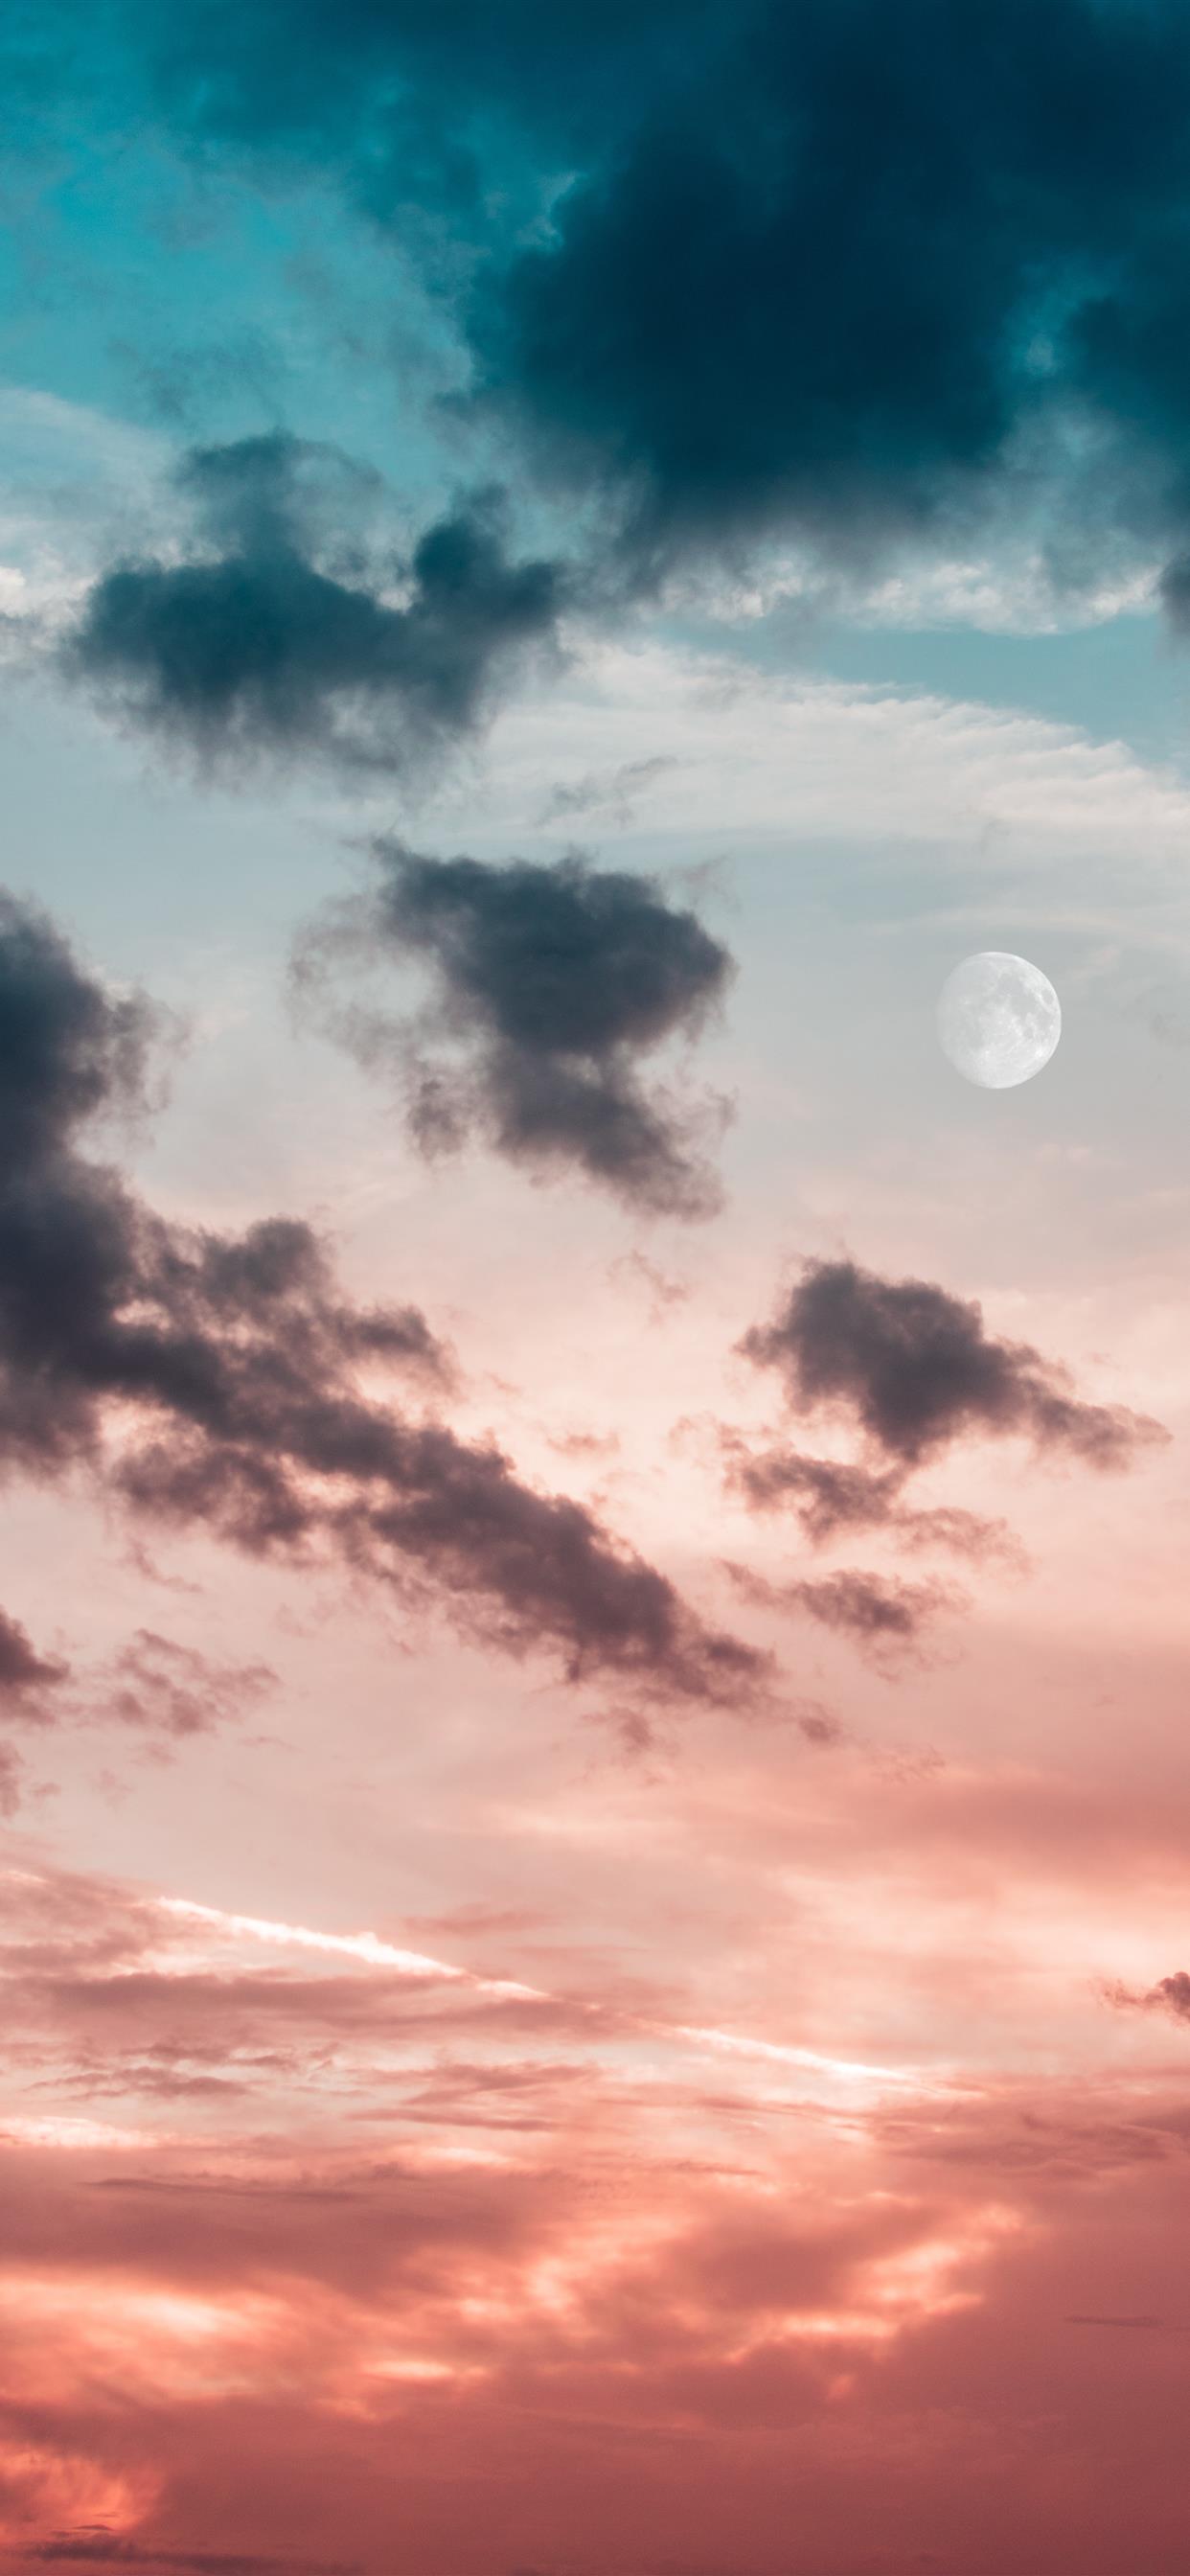 moon wallpapers for mobile,sky,cloud,daytime,afterglow,atmosphere